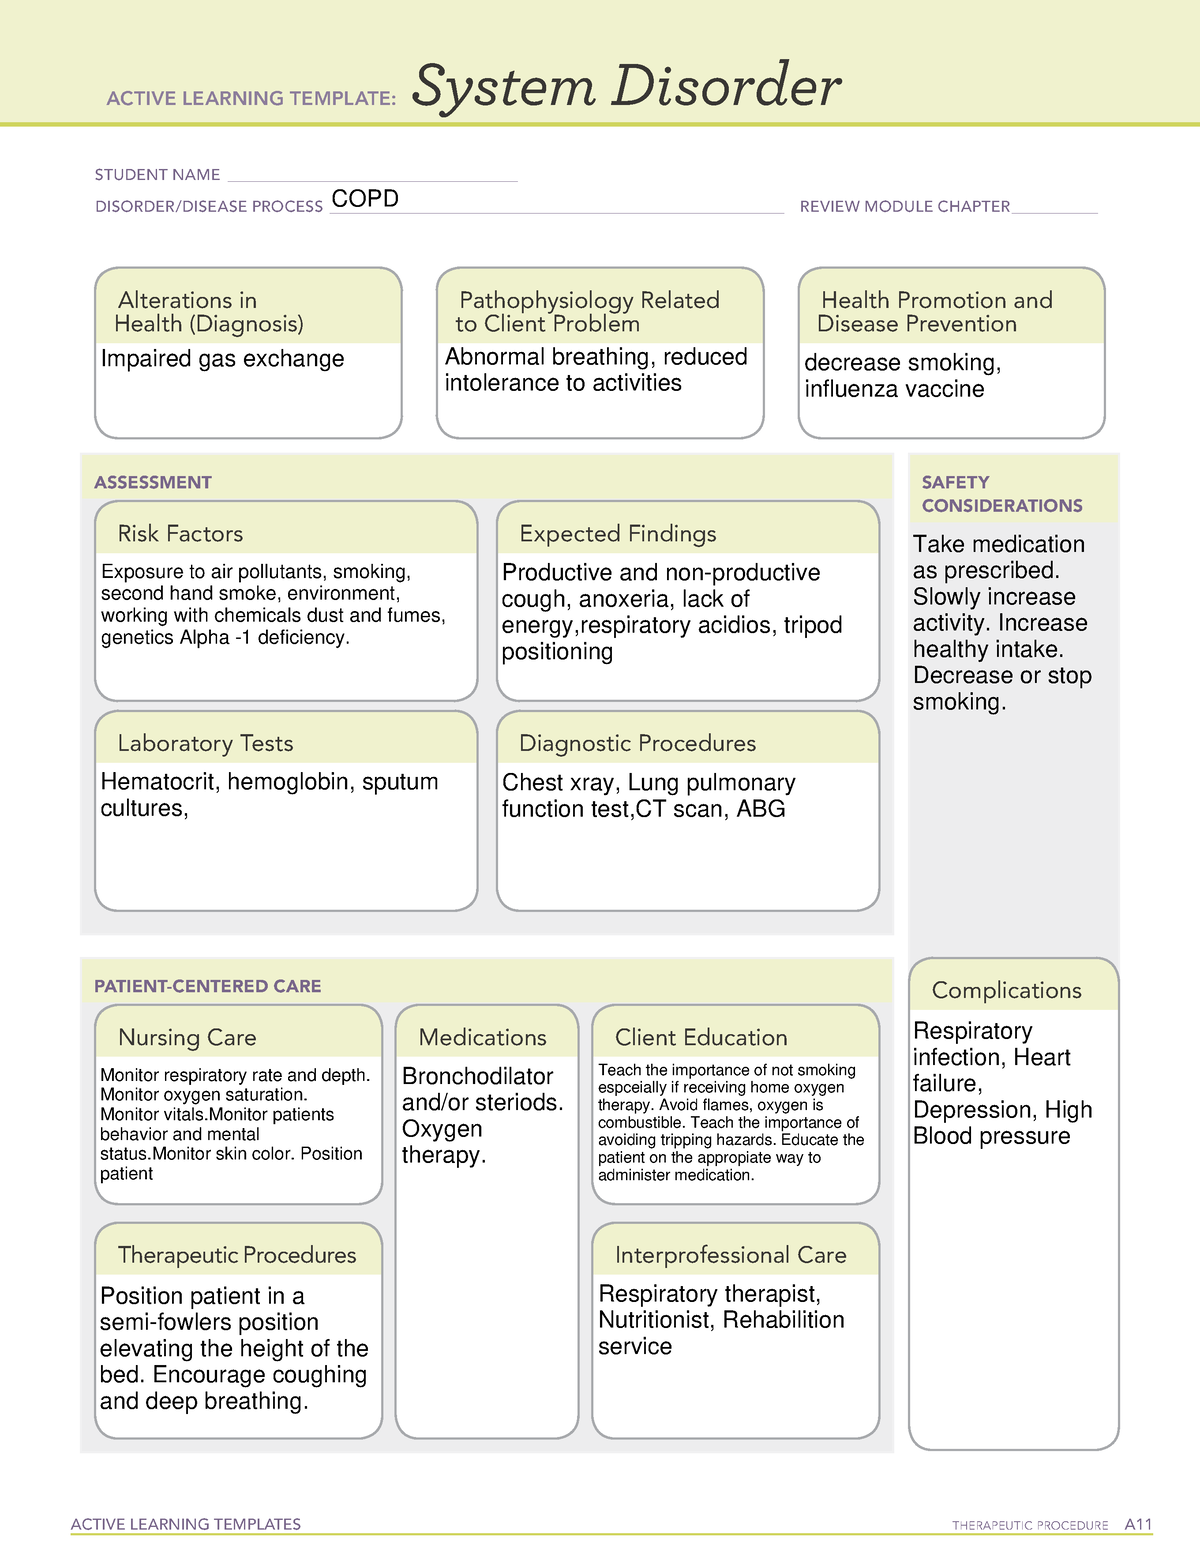 copd-active-learning-template-nurs326-medical-surgical-nursing